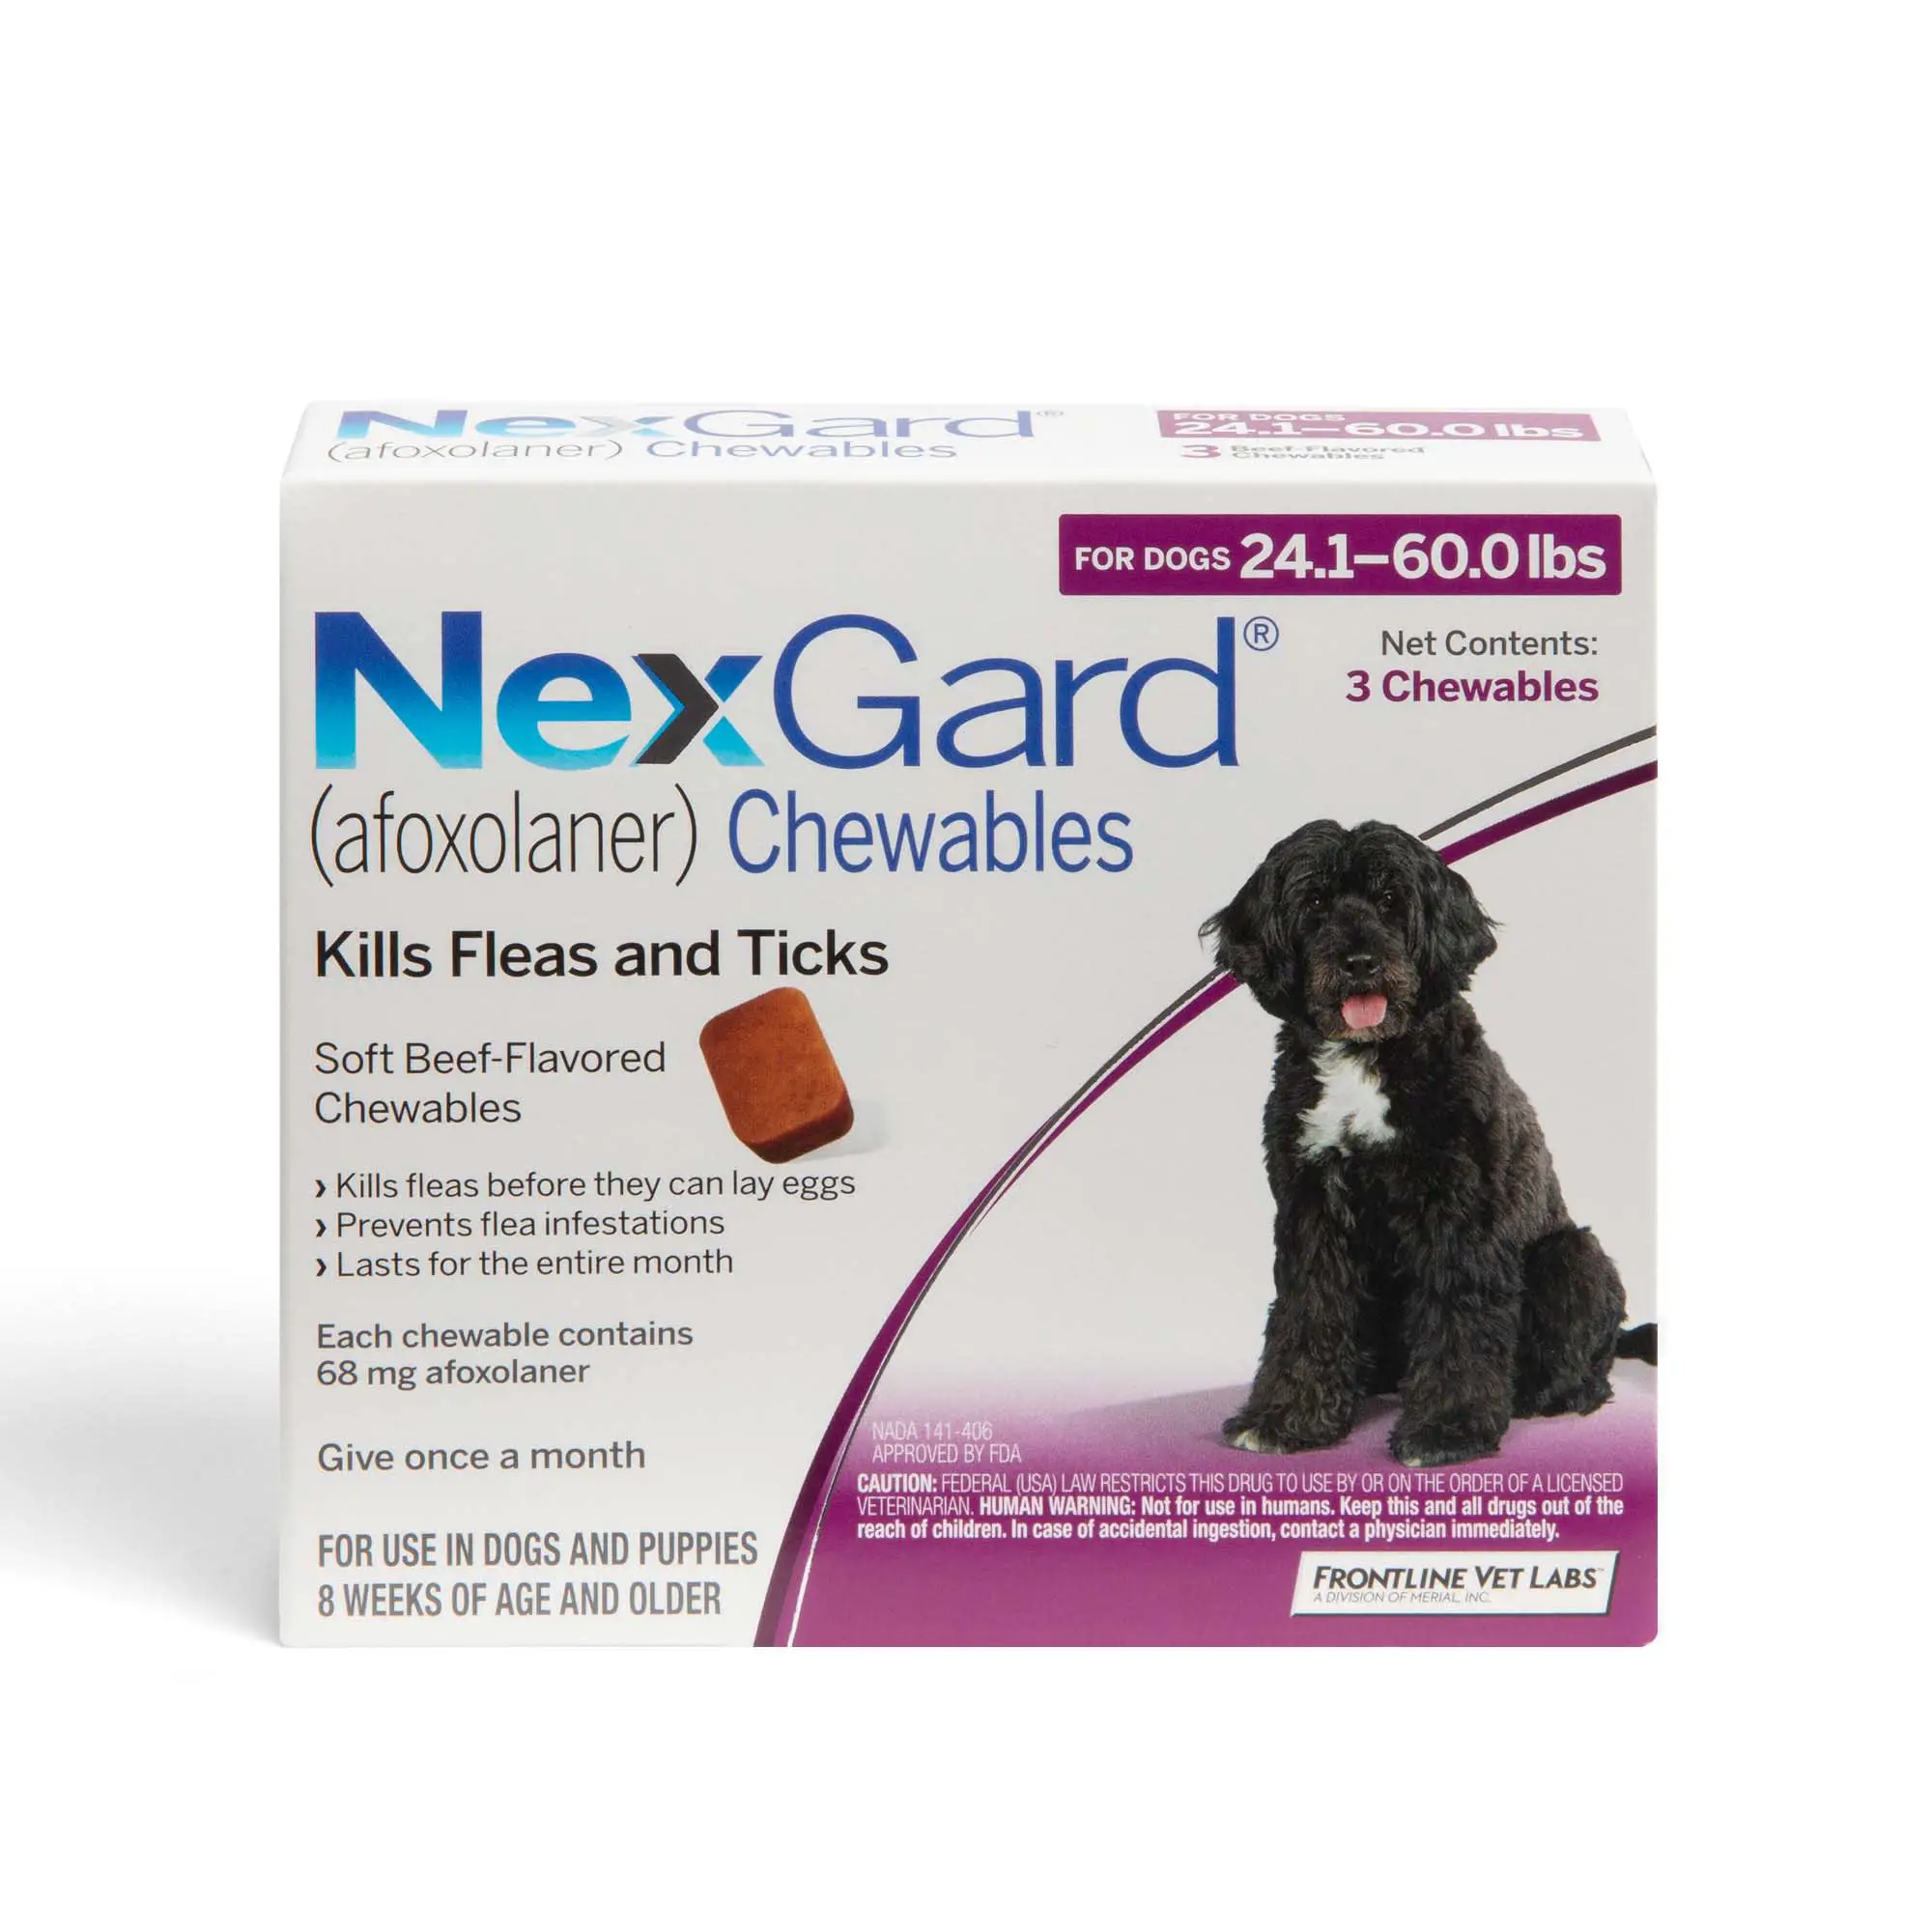 Nexgard for Dogs: Side Effects and Information